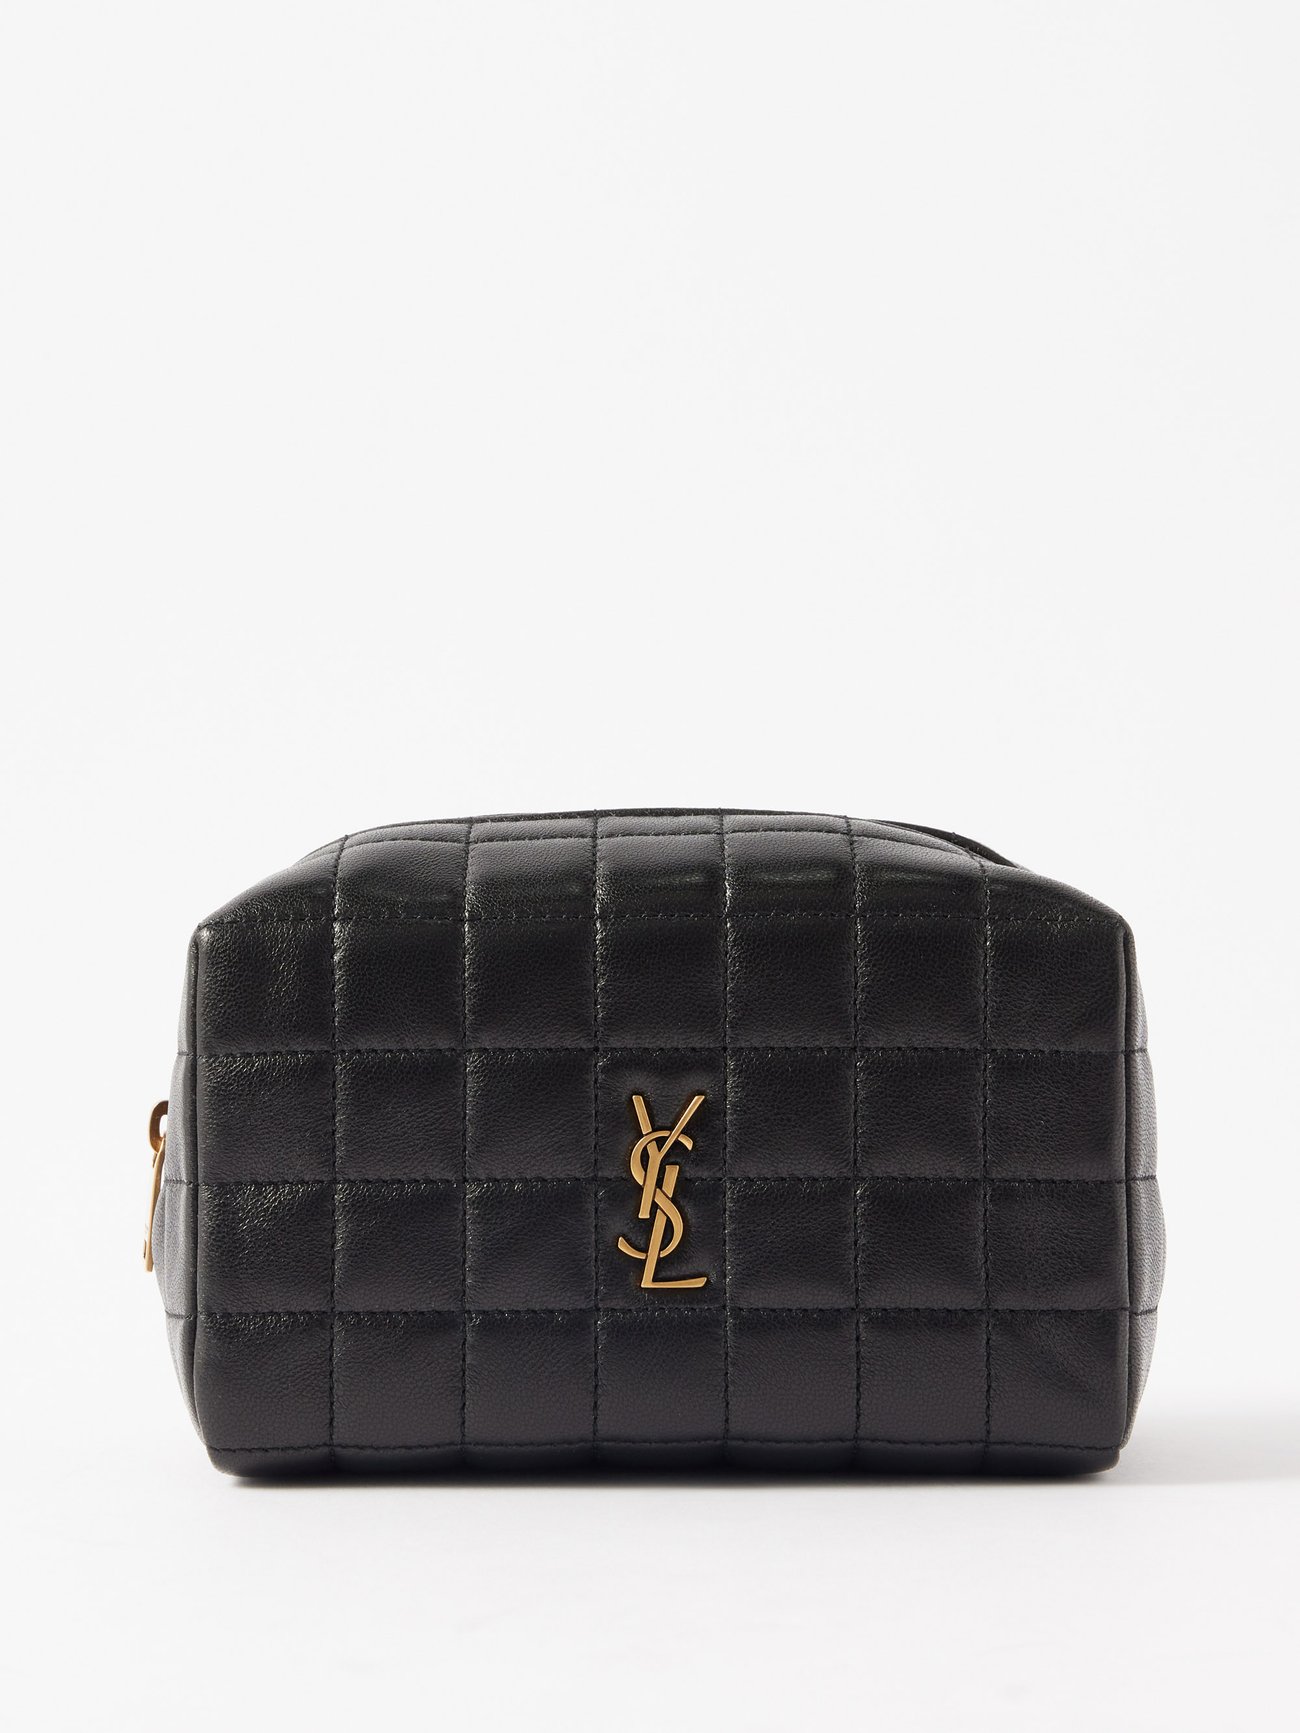 Saint Laurent Vicky Quilted Patent Leather Camera Bag Black